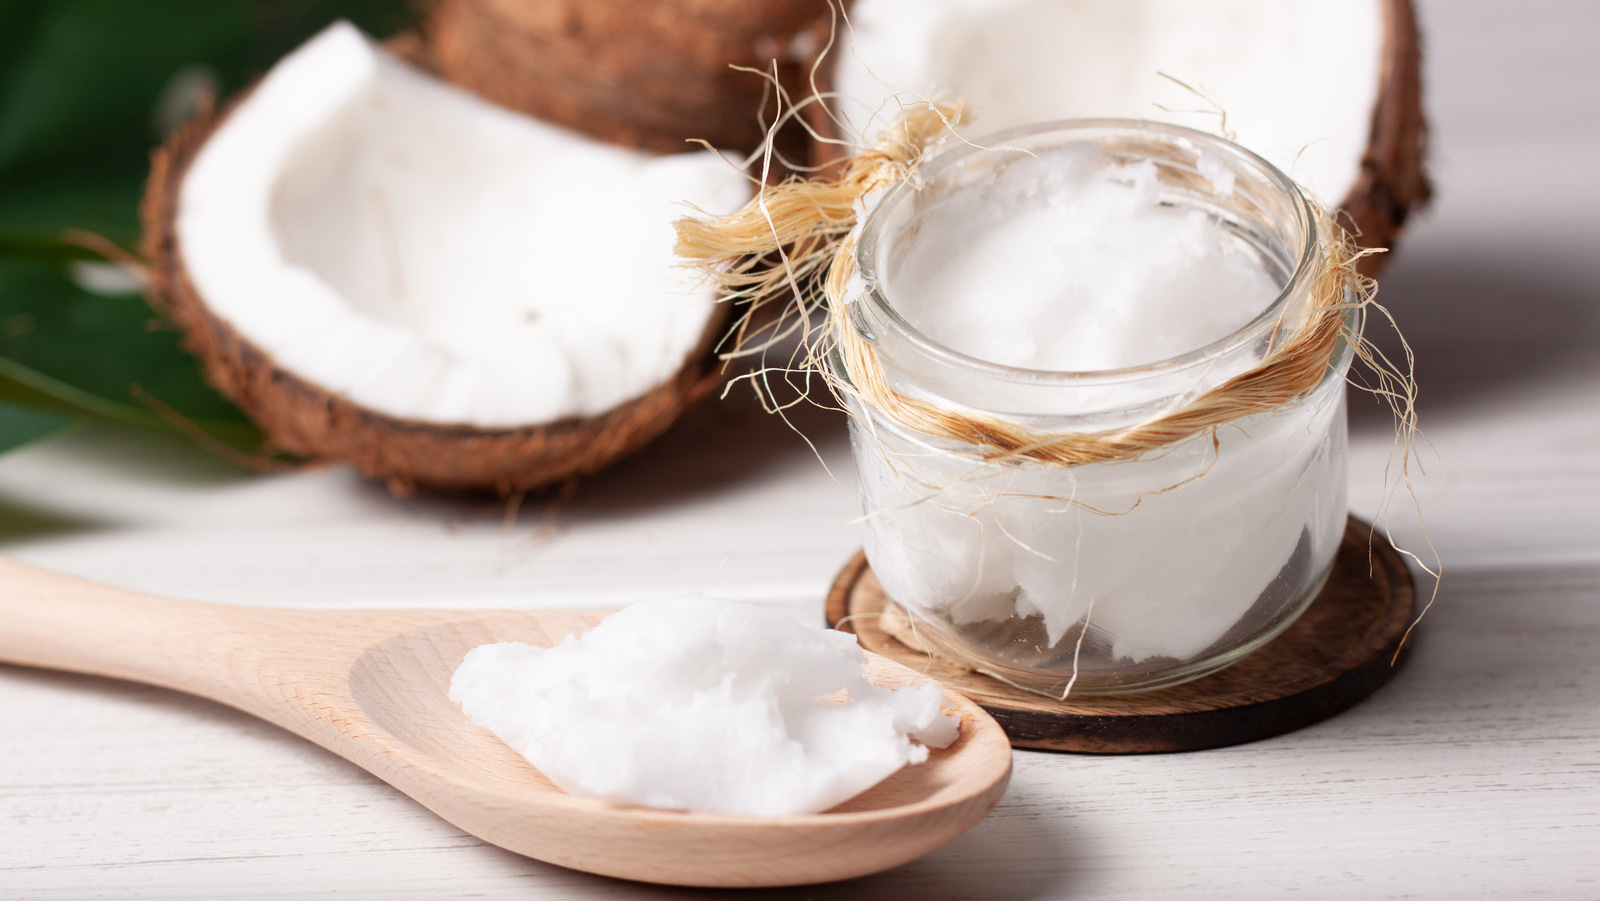 What Happens To Your Body When You Eat Coconut Oil Every Day